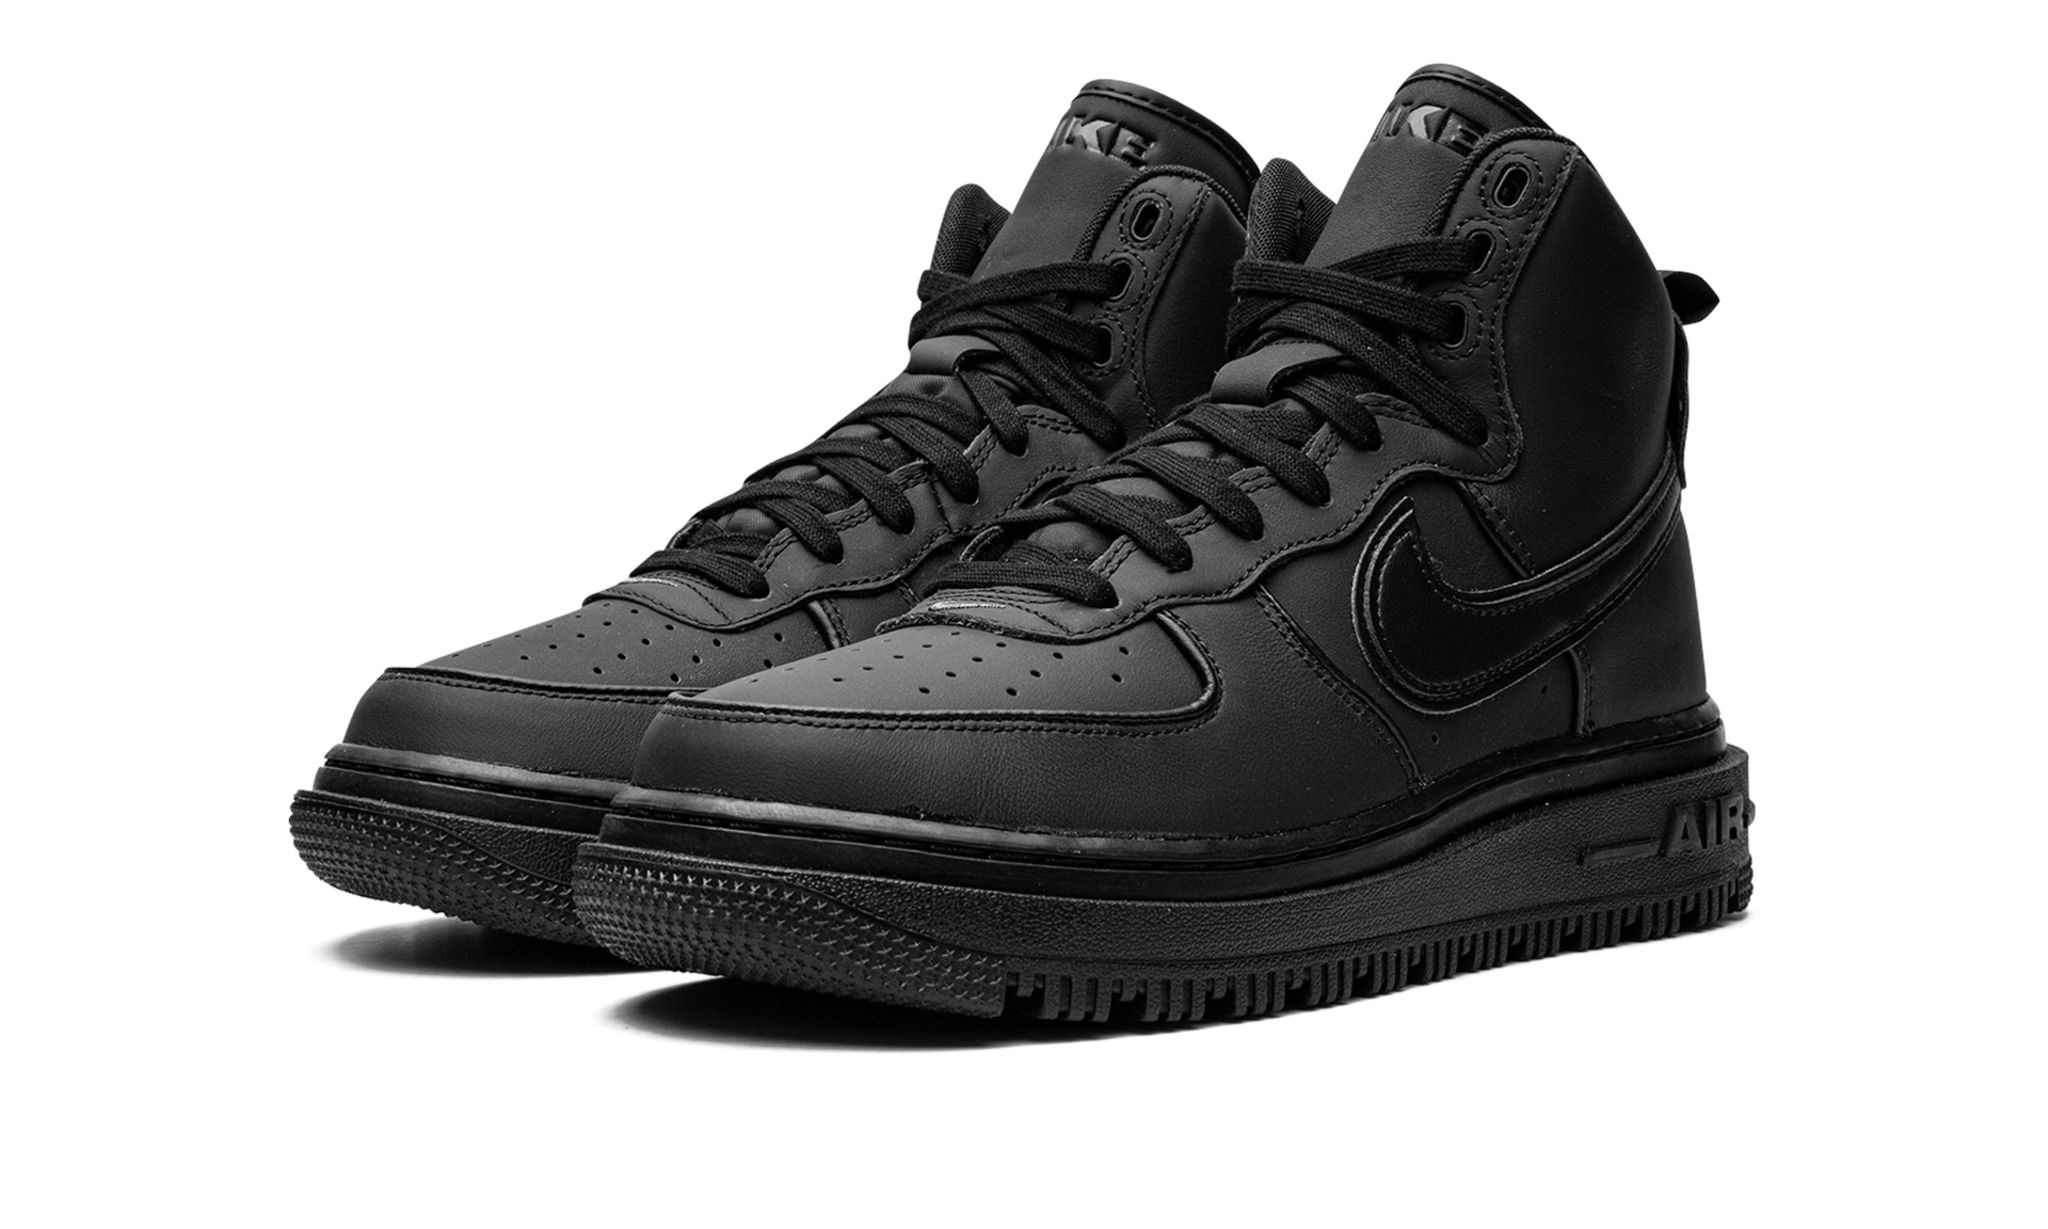 Air Force 1 Boot "Black / Anthracite" - 2